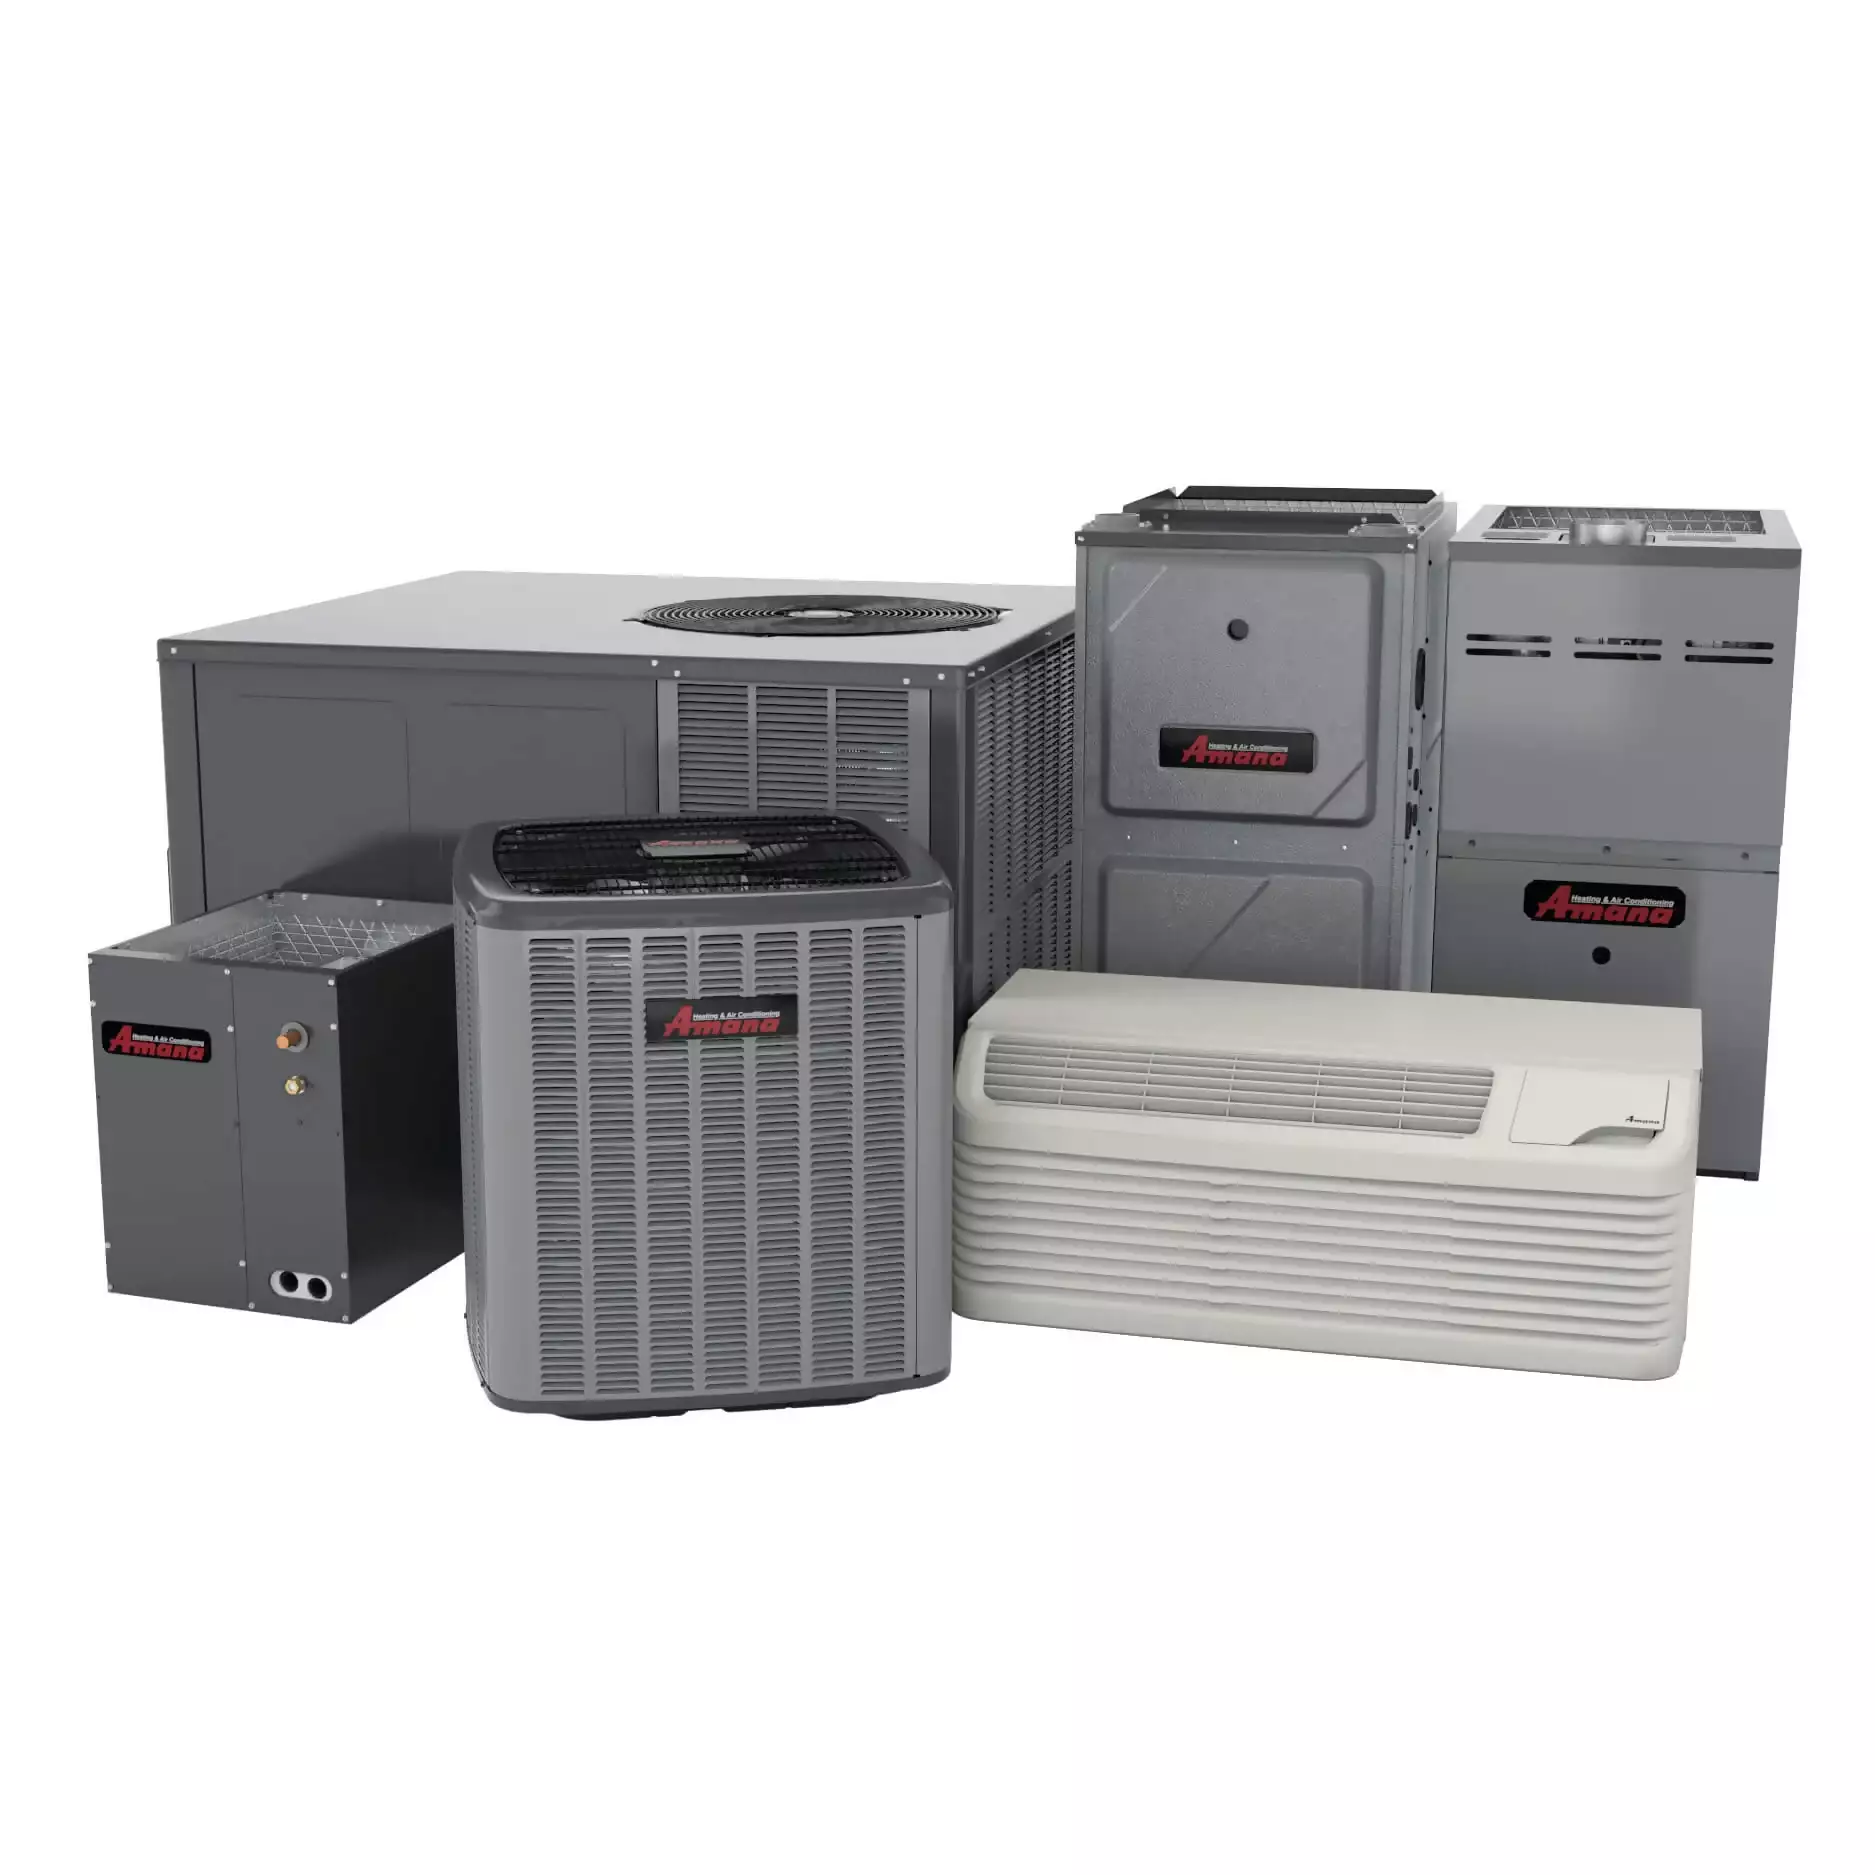 Amana-Heating-and-air-conditioning-products-1